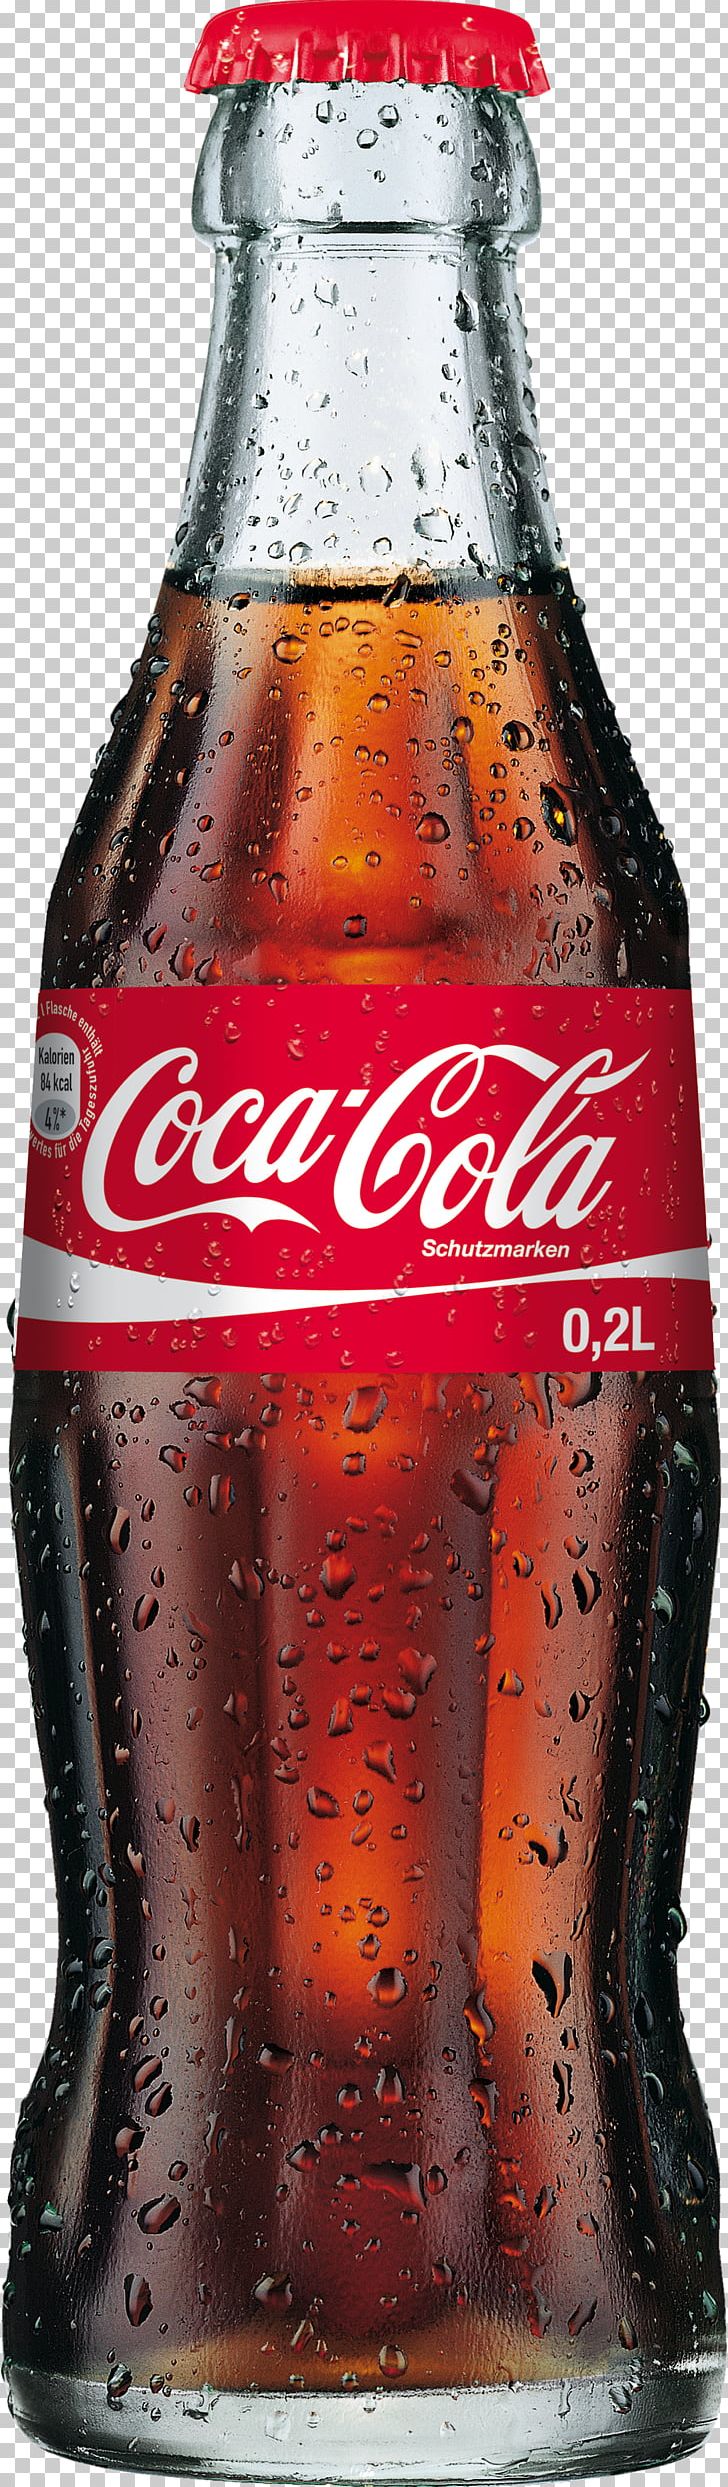 Coca-Cola Fizzy Drinks Diet Coke Fanta PNG, Clipart, Beverage Can, Bottle, Carbonated Soft Drinks, Coca, Coca Cola Free PNG Download